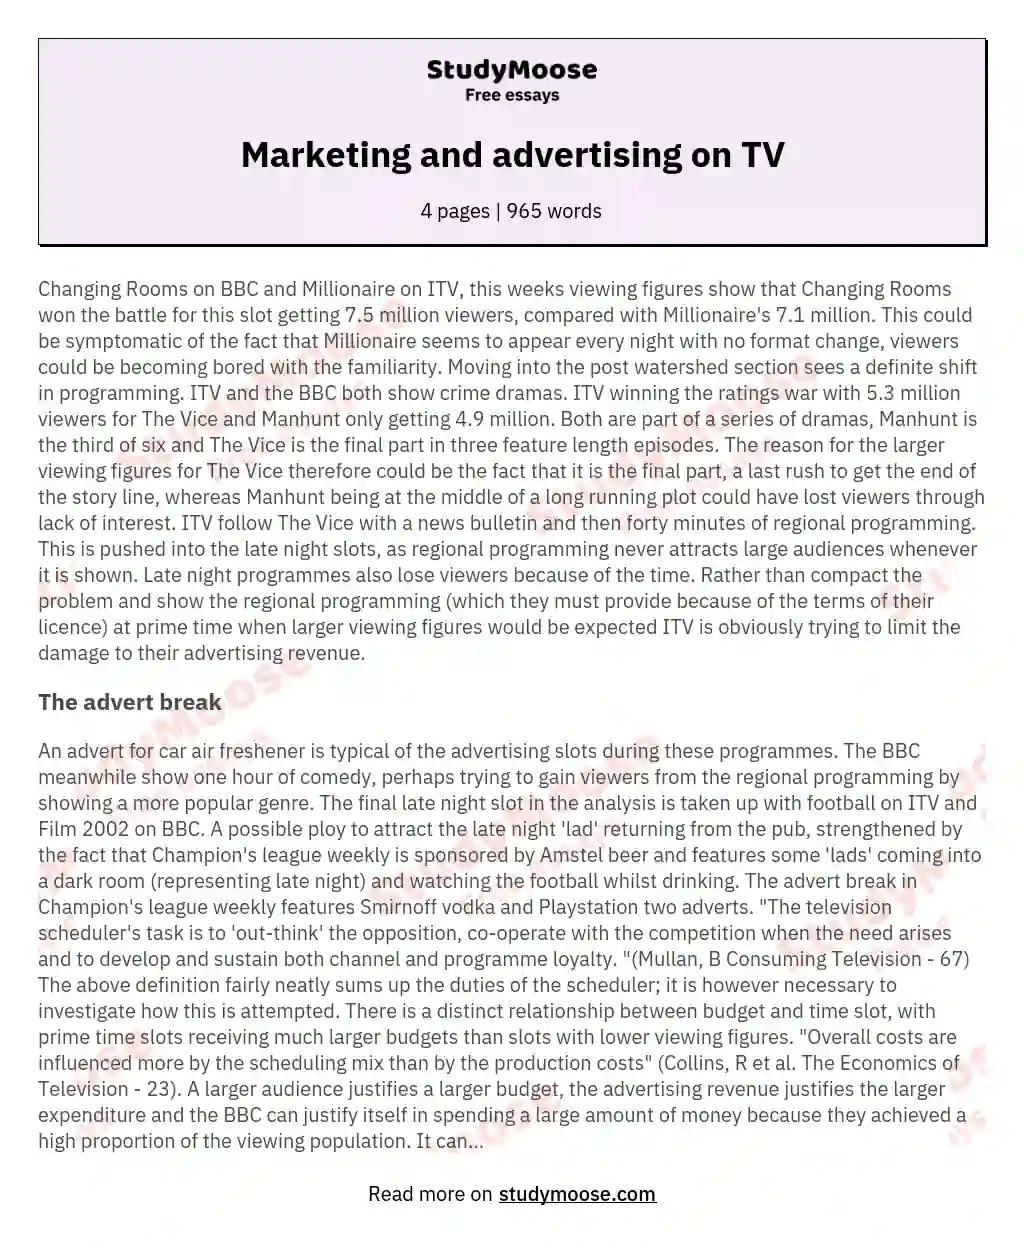 Marketing and advertising on TV essay